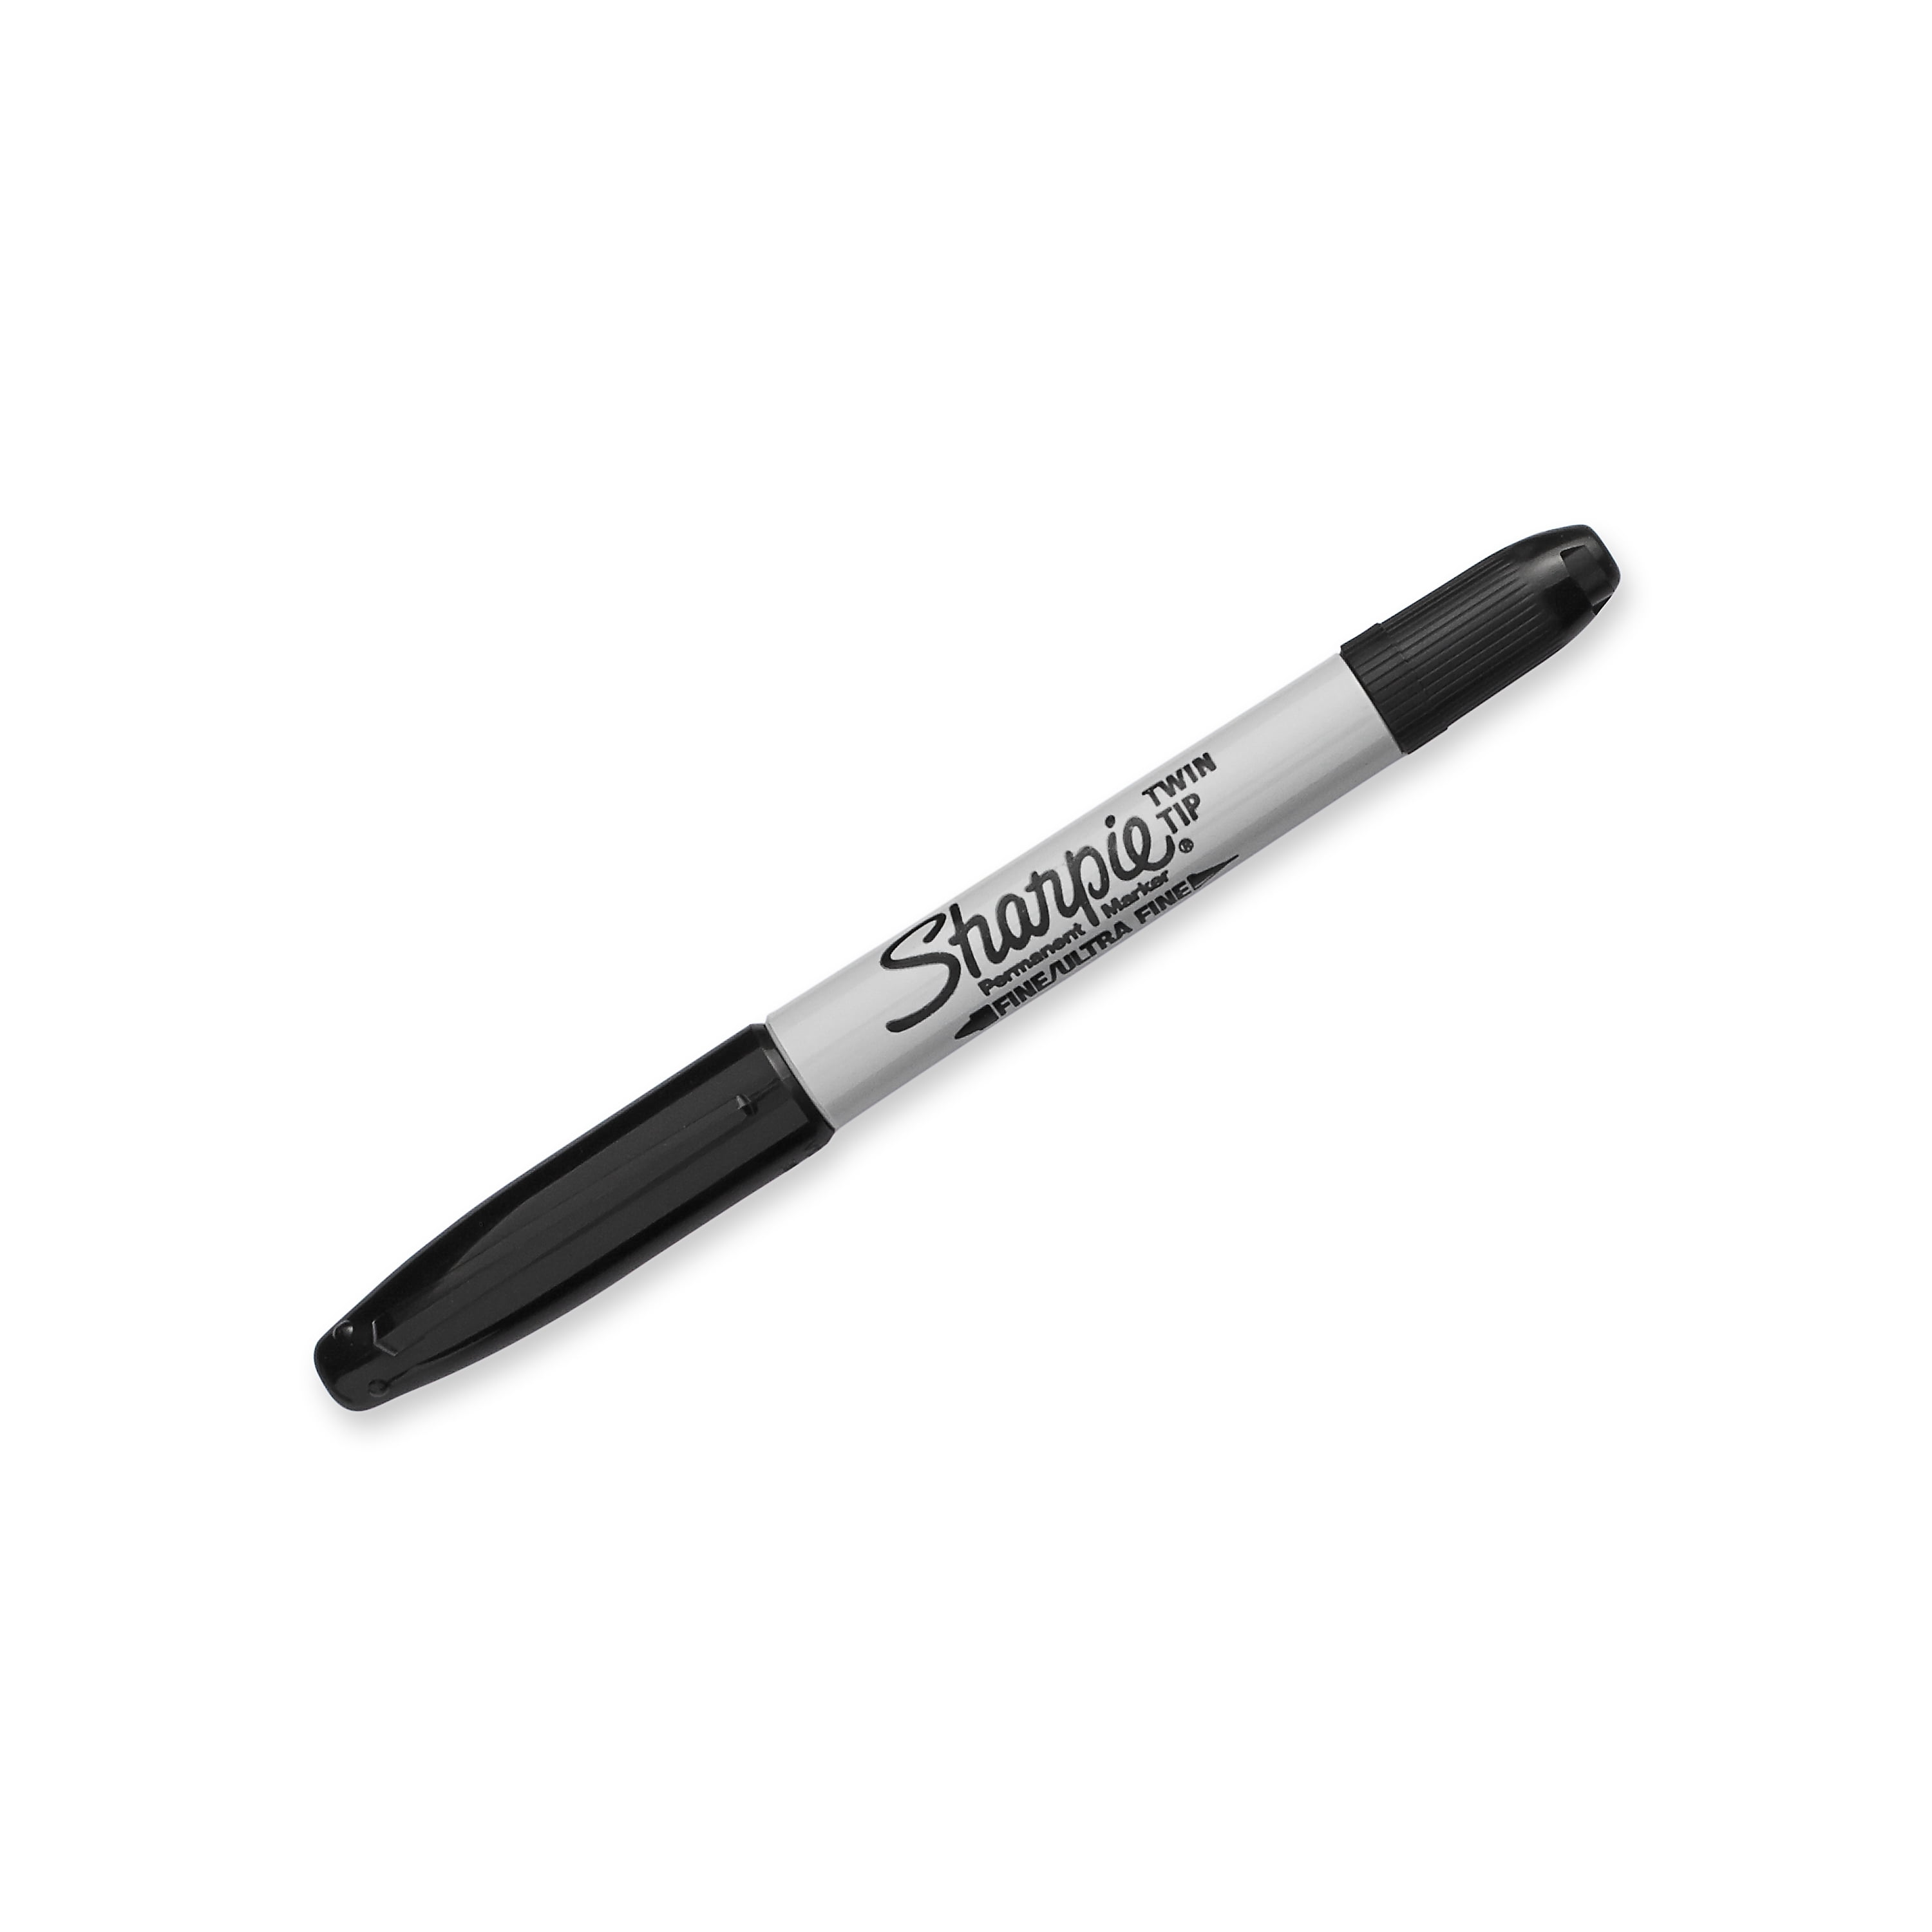 Pack of 2 Black Twin Tip Sharpie Permanent Marker